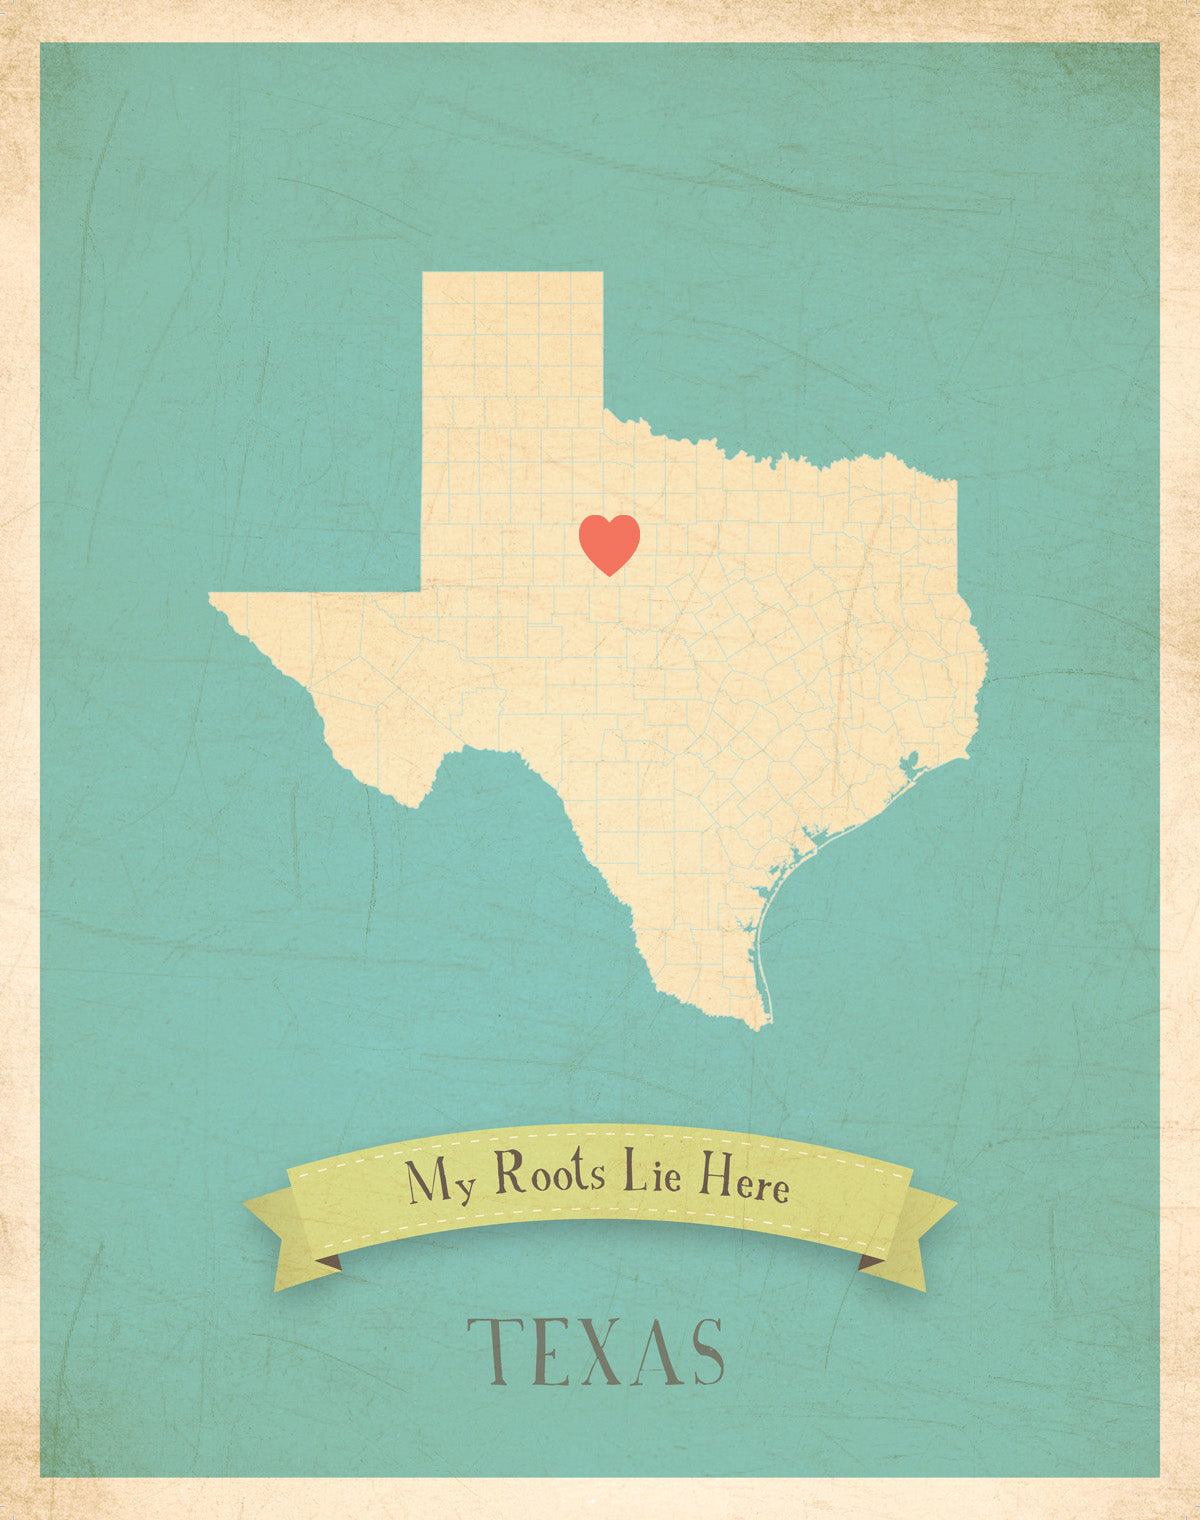 My Roots Collection Texas Children Inspire Design